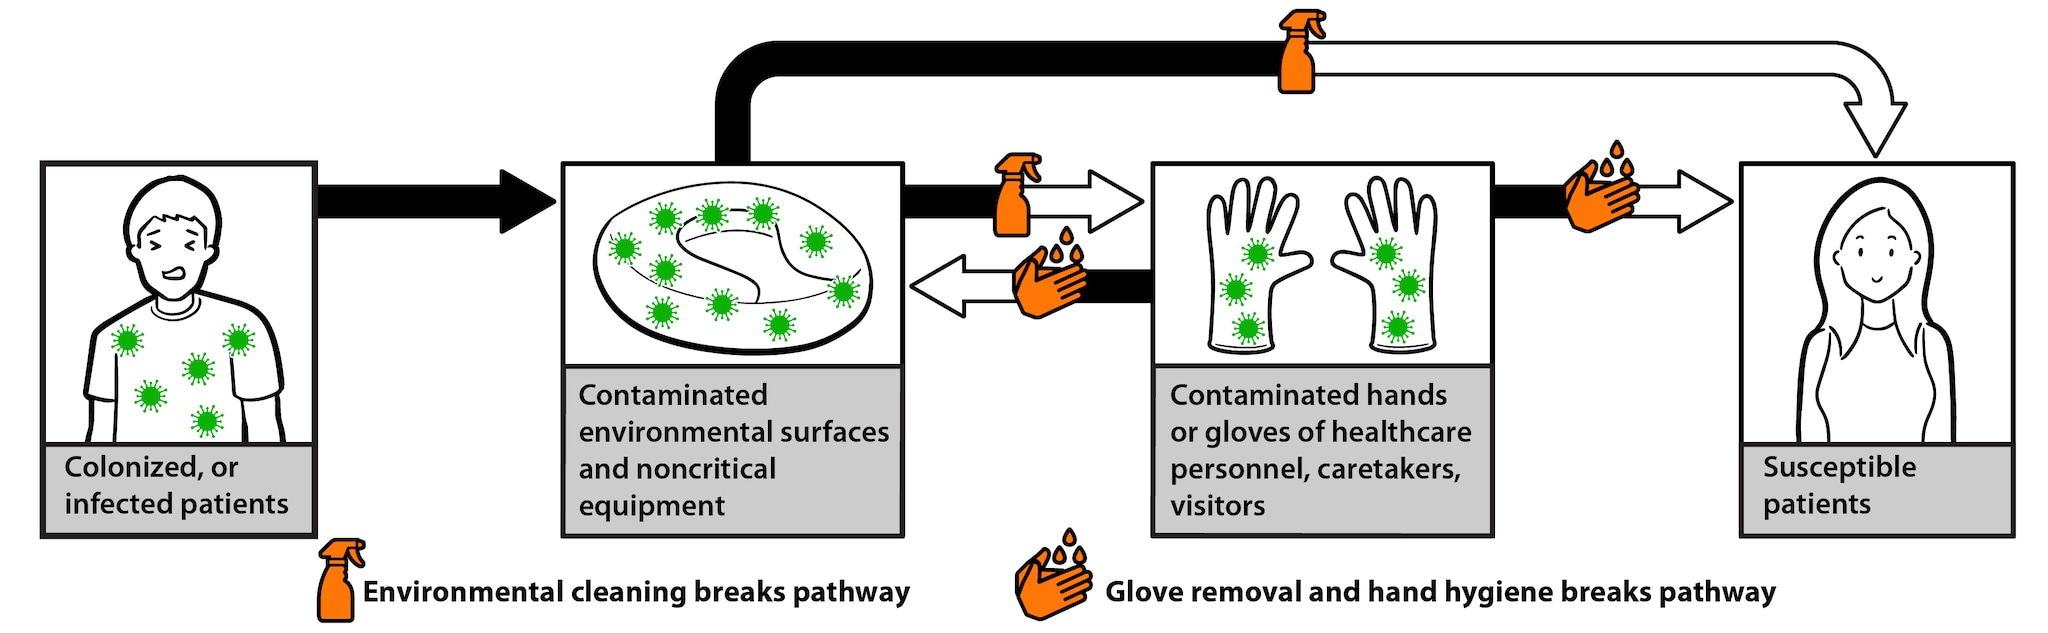 Germs can spread by direct or indirect contact from surfaces or healthcare worker's hands.